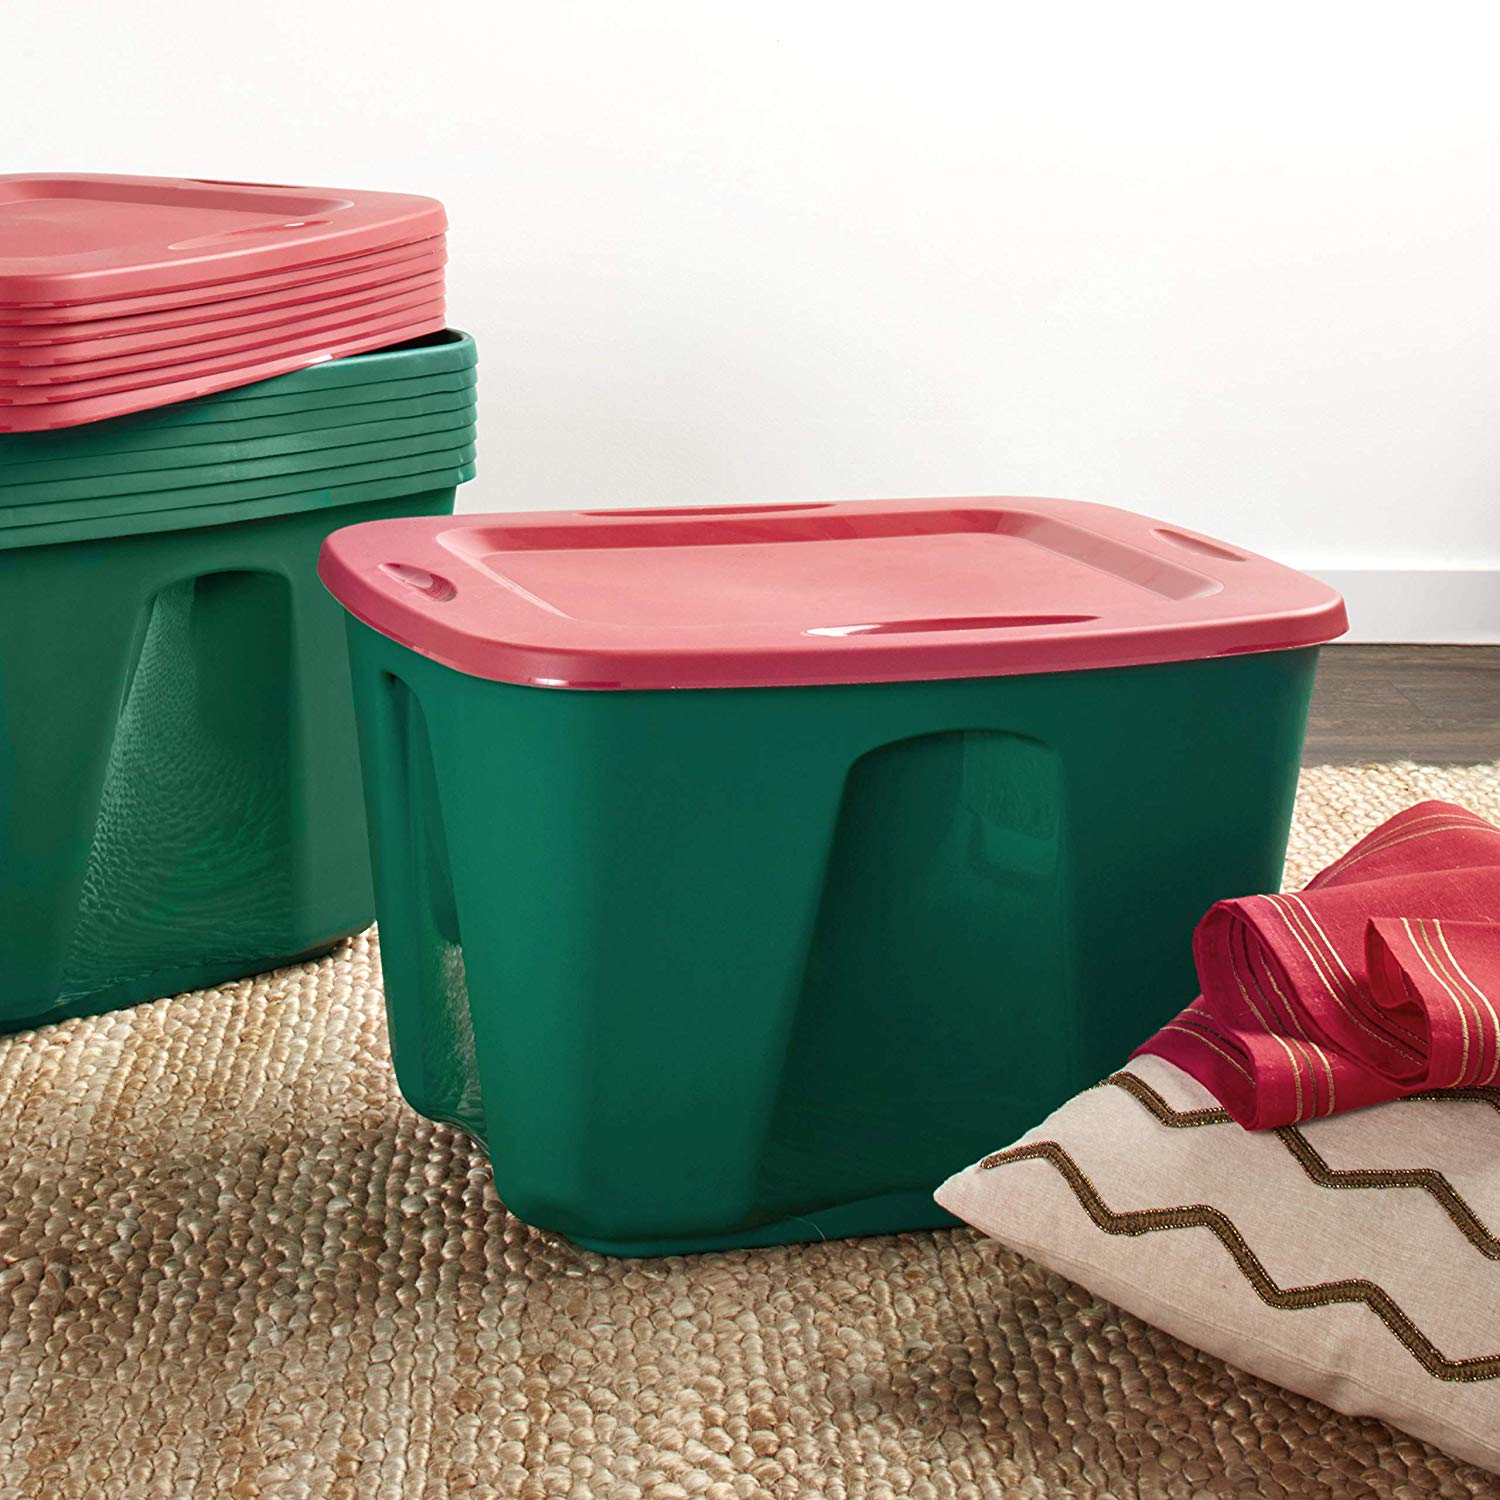 Homz 18 Gallon Heavy Duty Plastic Holiday Storage Totes, Green/Red (4 Pack)